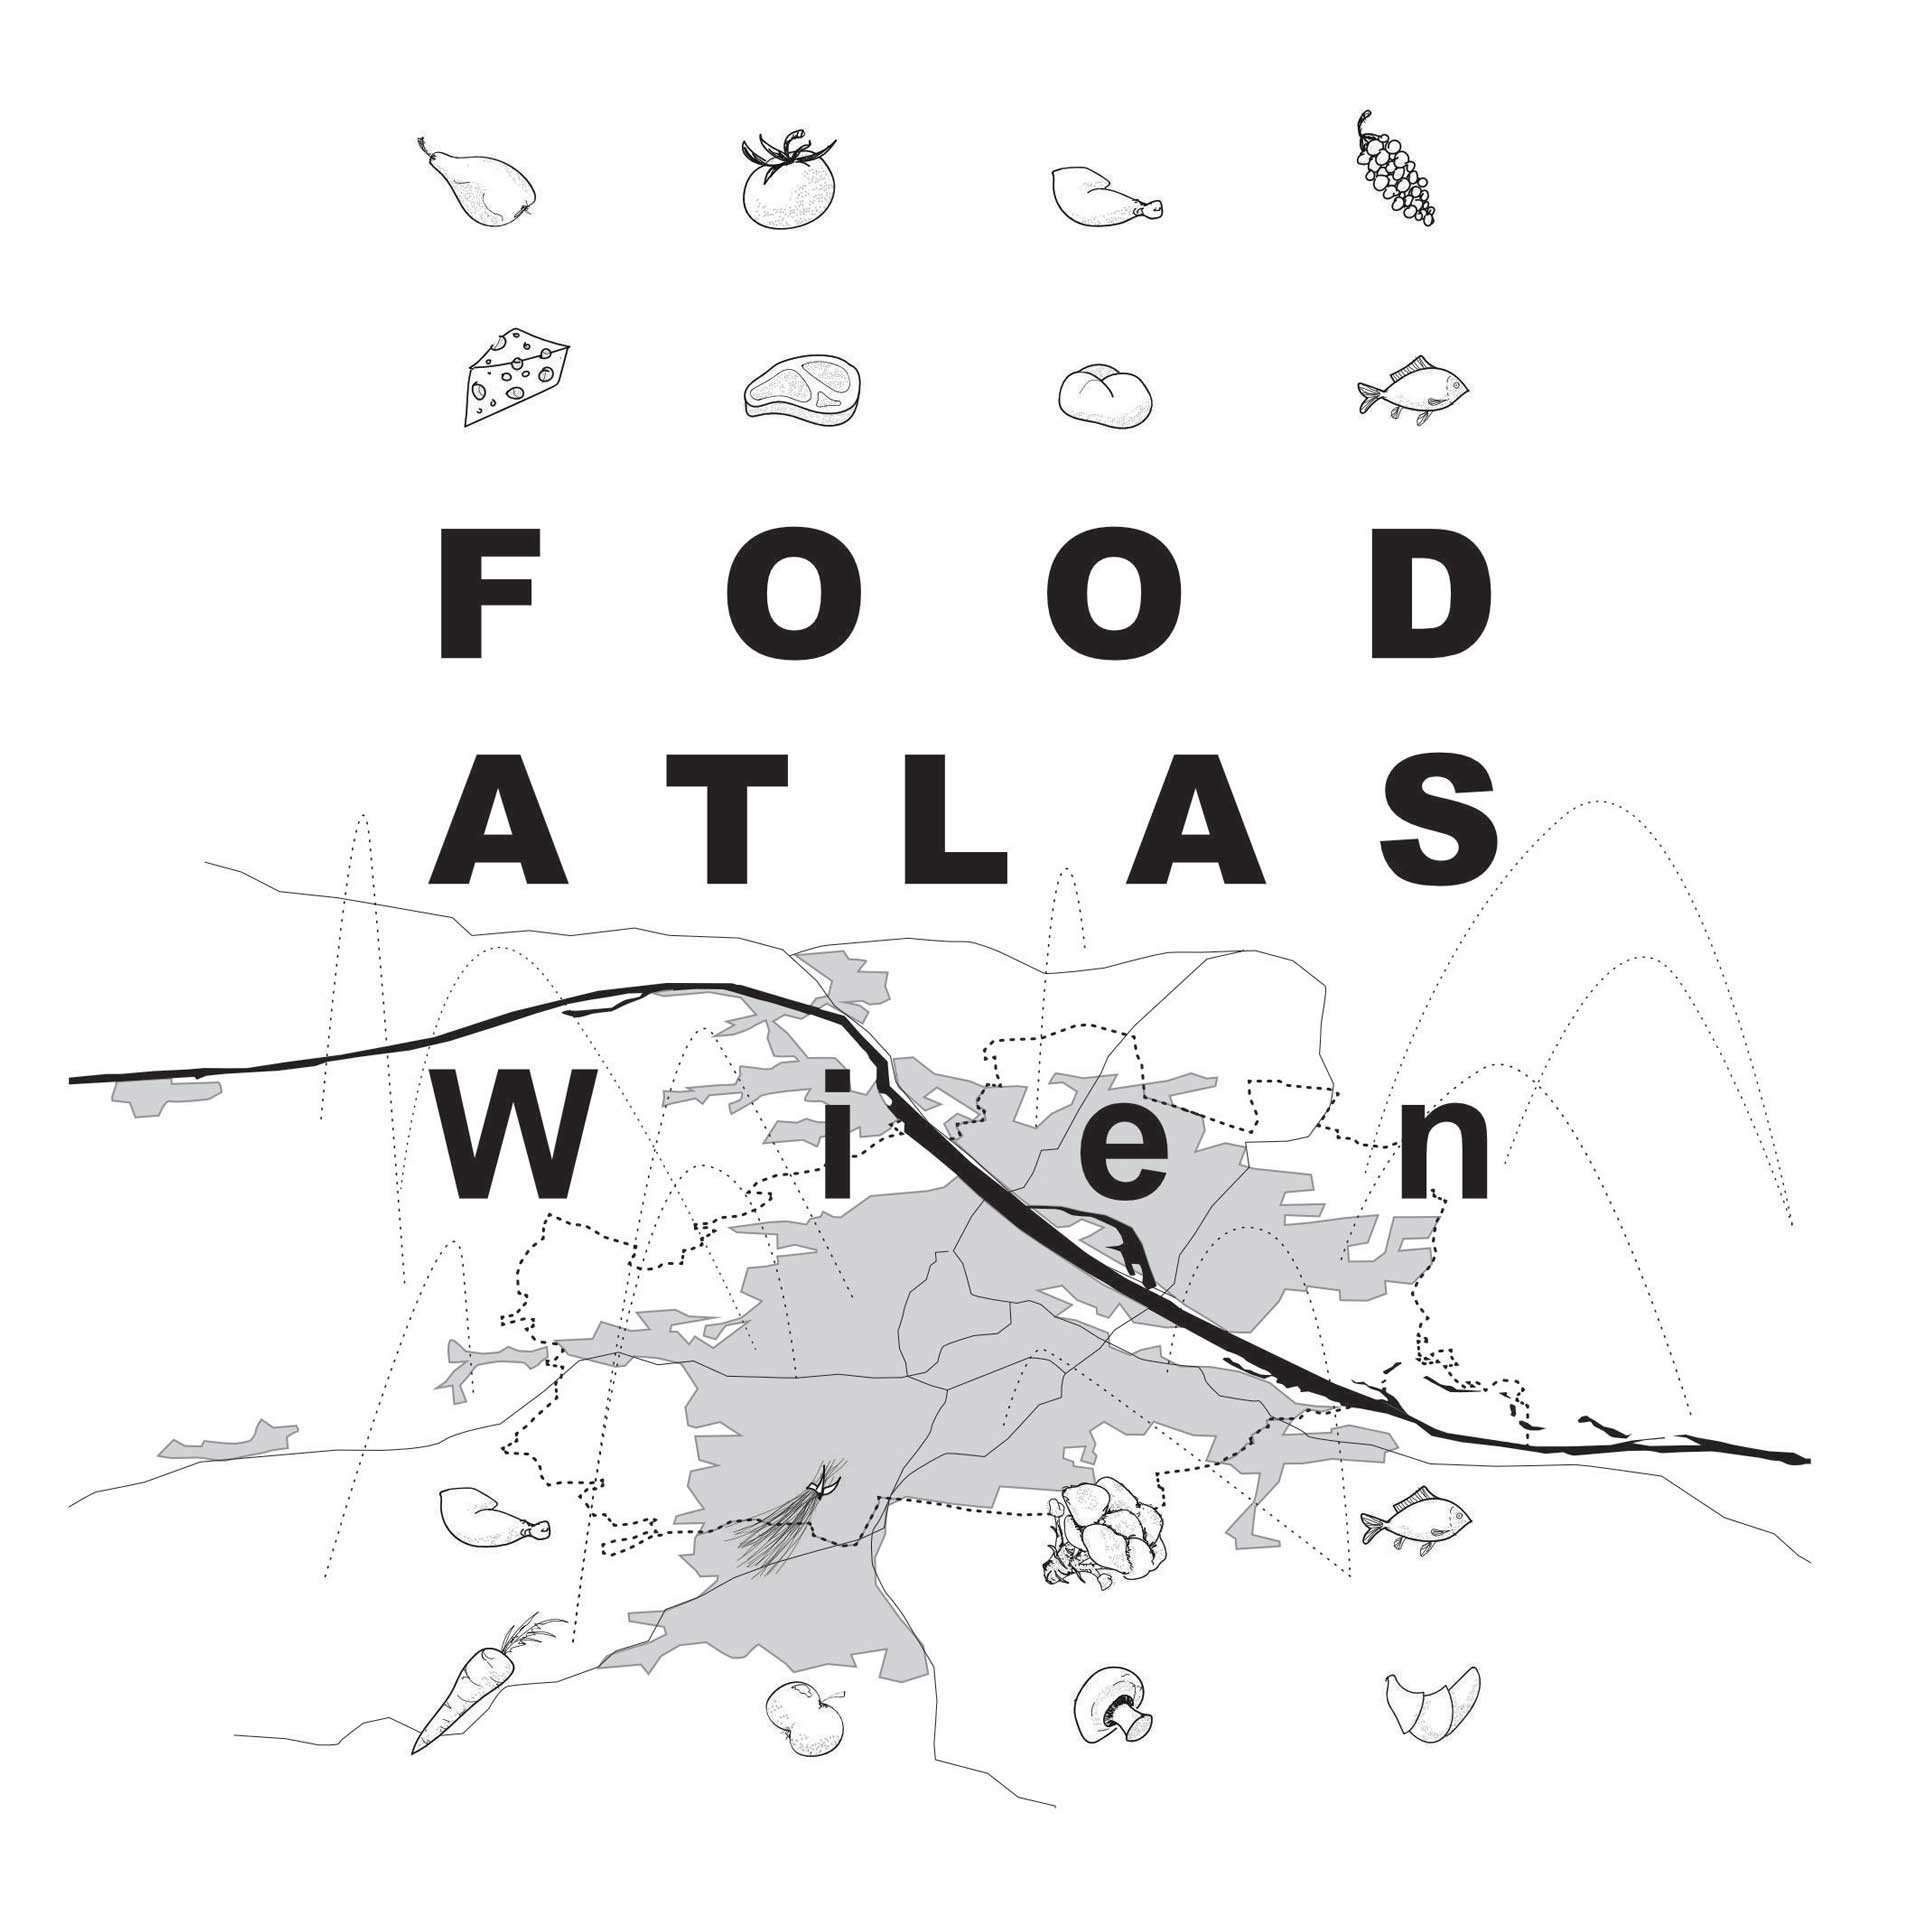 <BODY><div>EAT LOVE</div><div>Tomorrow’s Food and Food Spaces</div><div>Vanessa Braun and Daniel Löschenbrand, Food Atlas Wien, 2021</div><div>© Vanessa Braun and Daniel Löschenbrand</div></BODY>